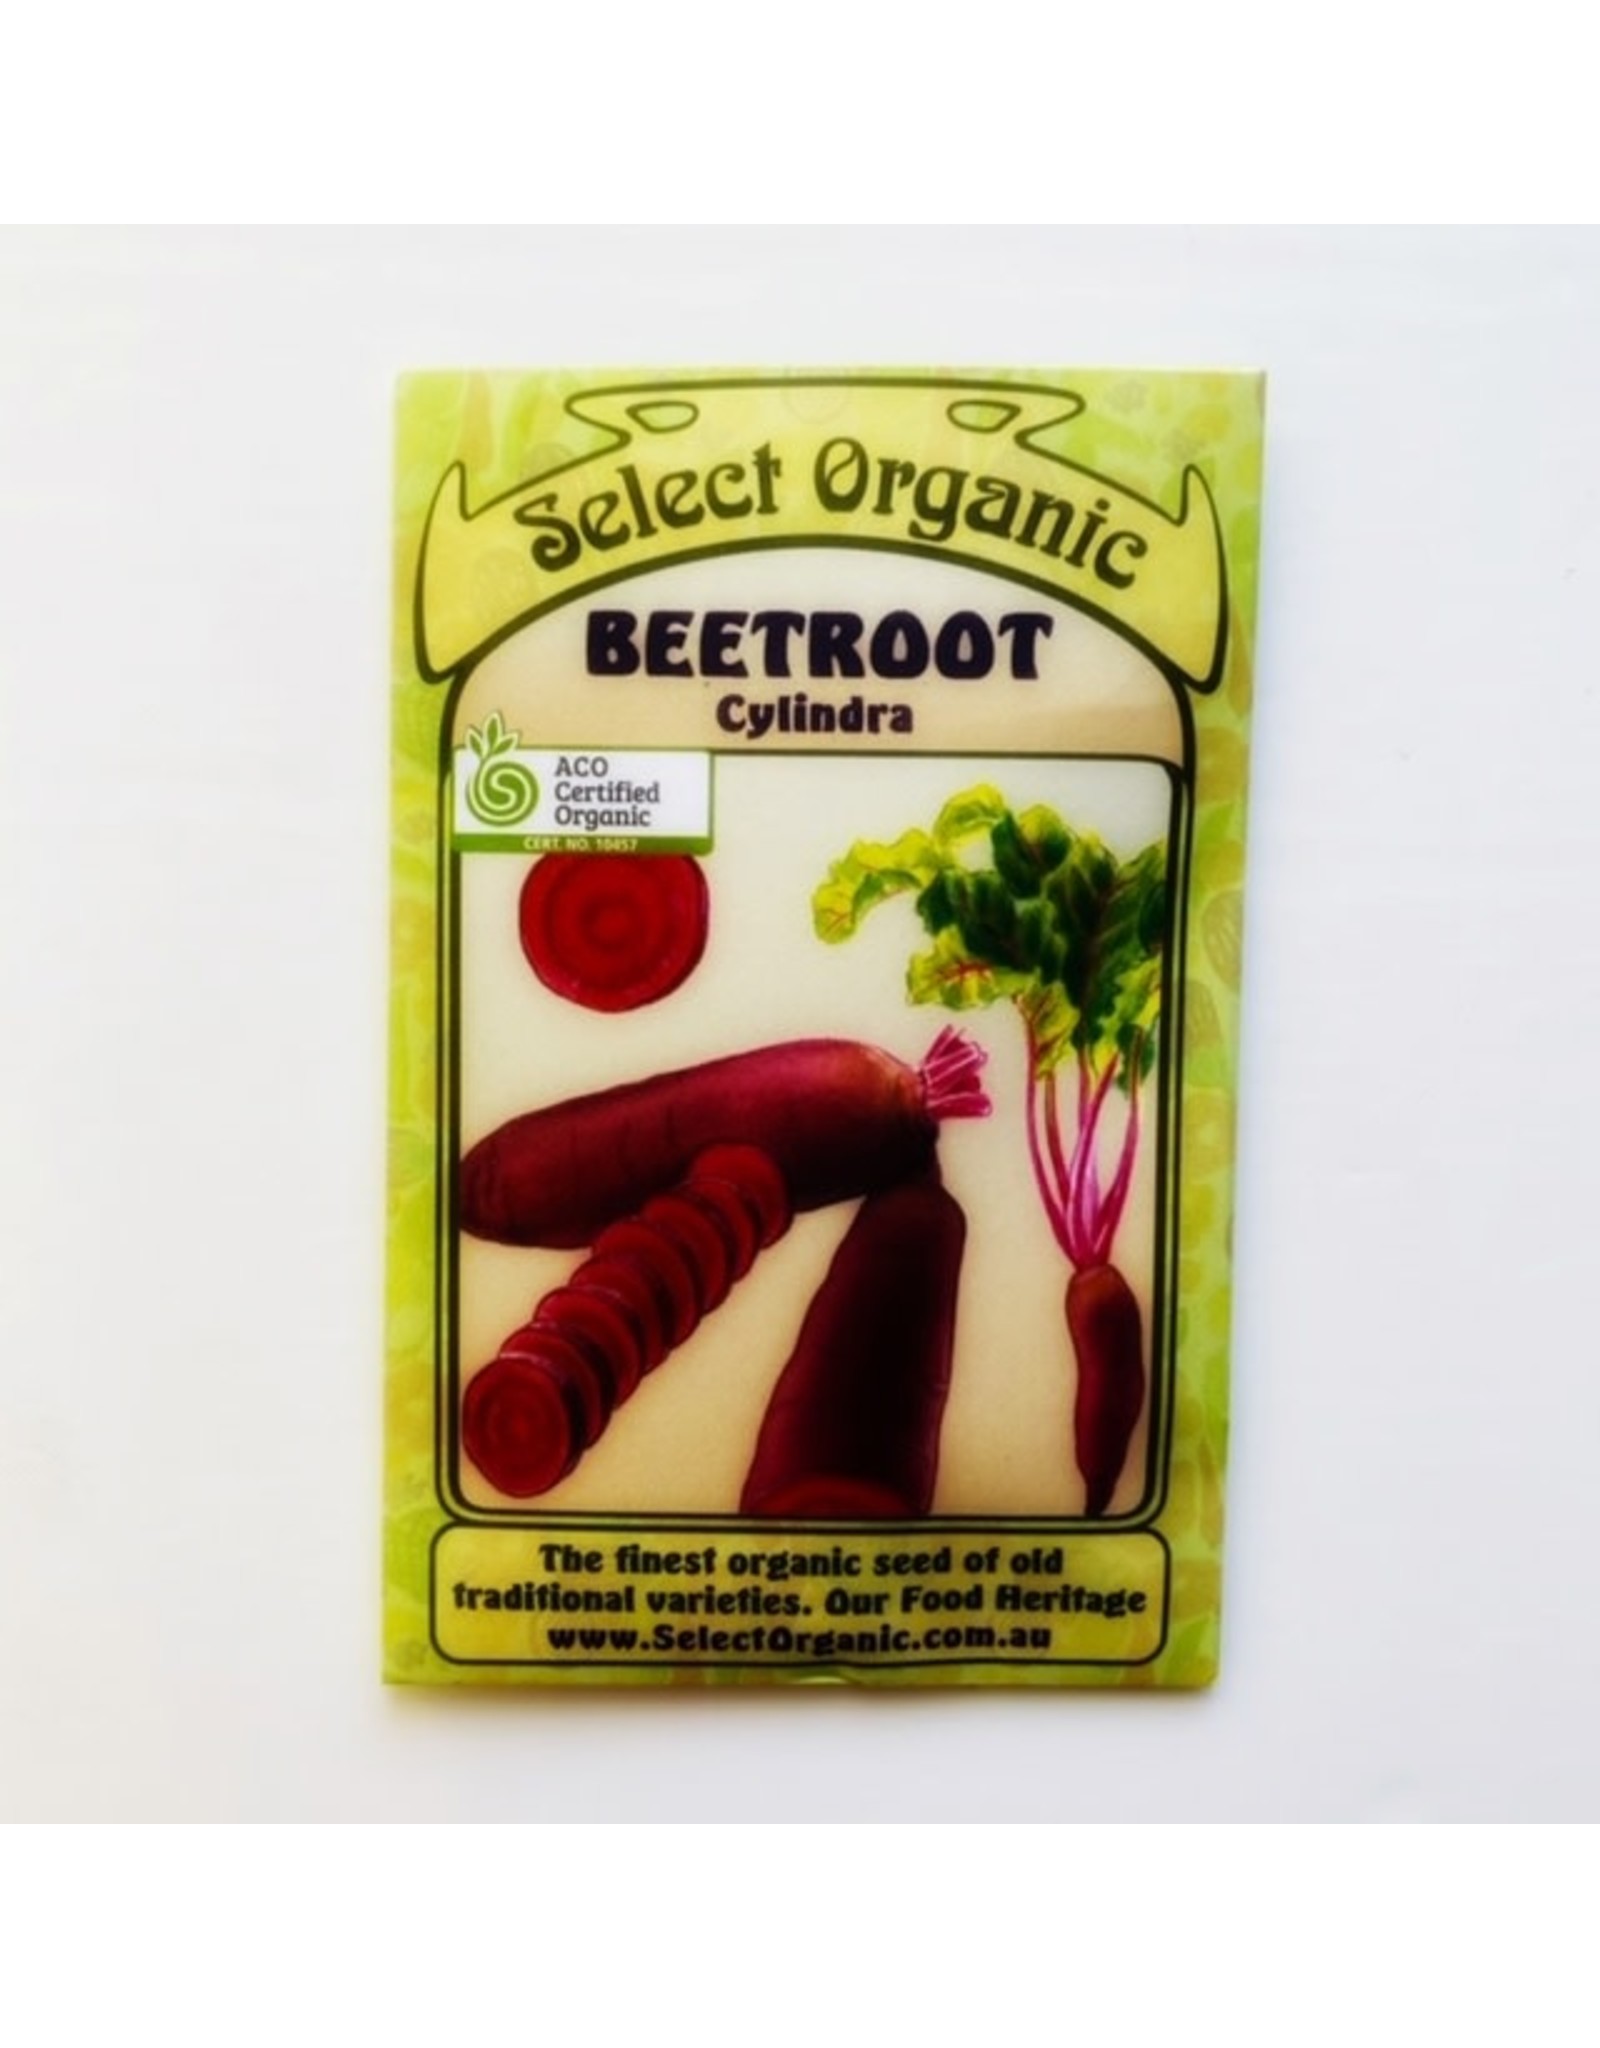 Select Organic Beetroot (Cylindra) Seeds